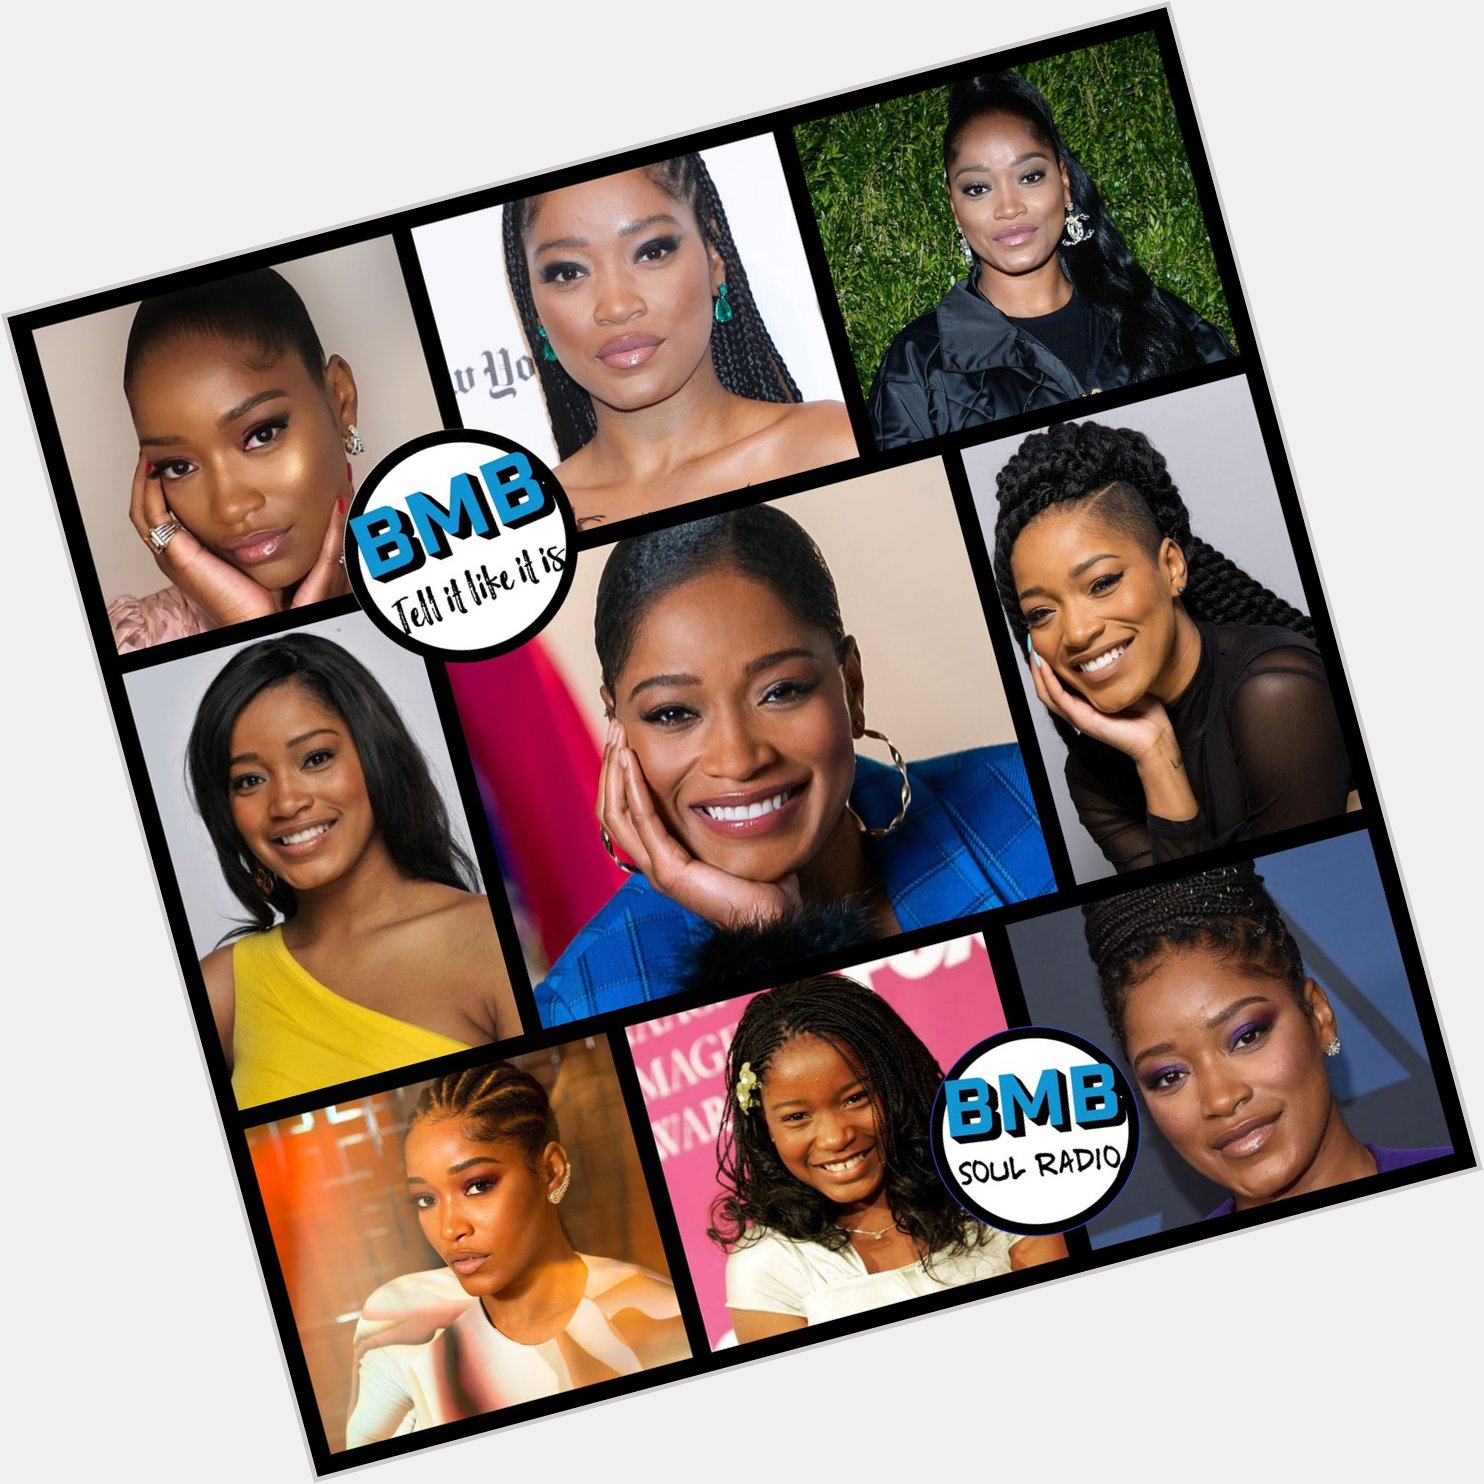      Happy Birthday To Actress Keke Palmer! She Is 29 Today!    